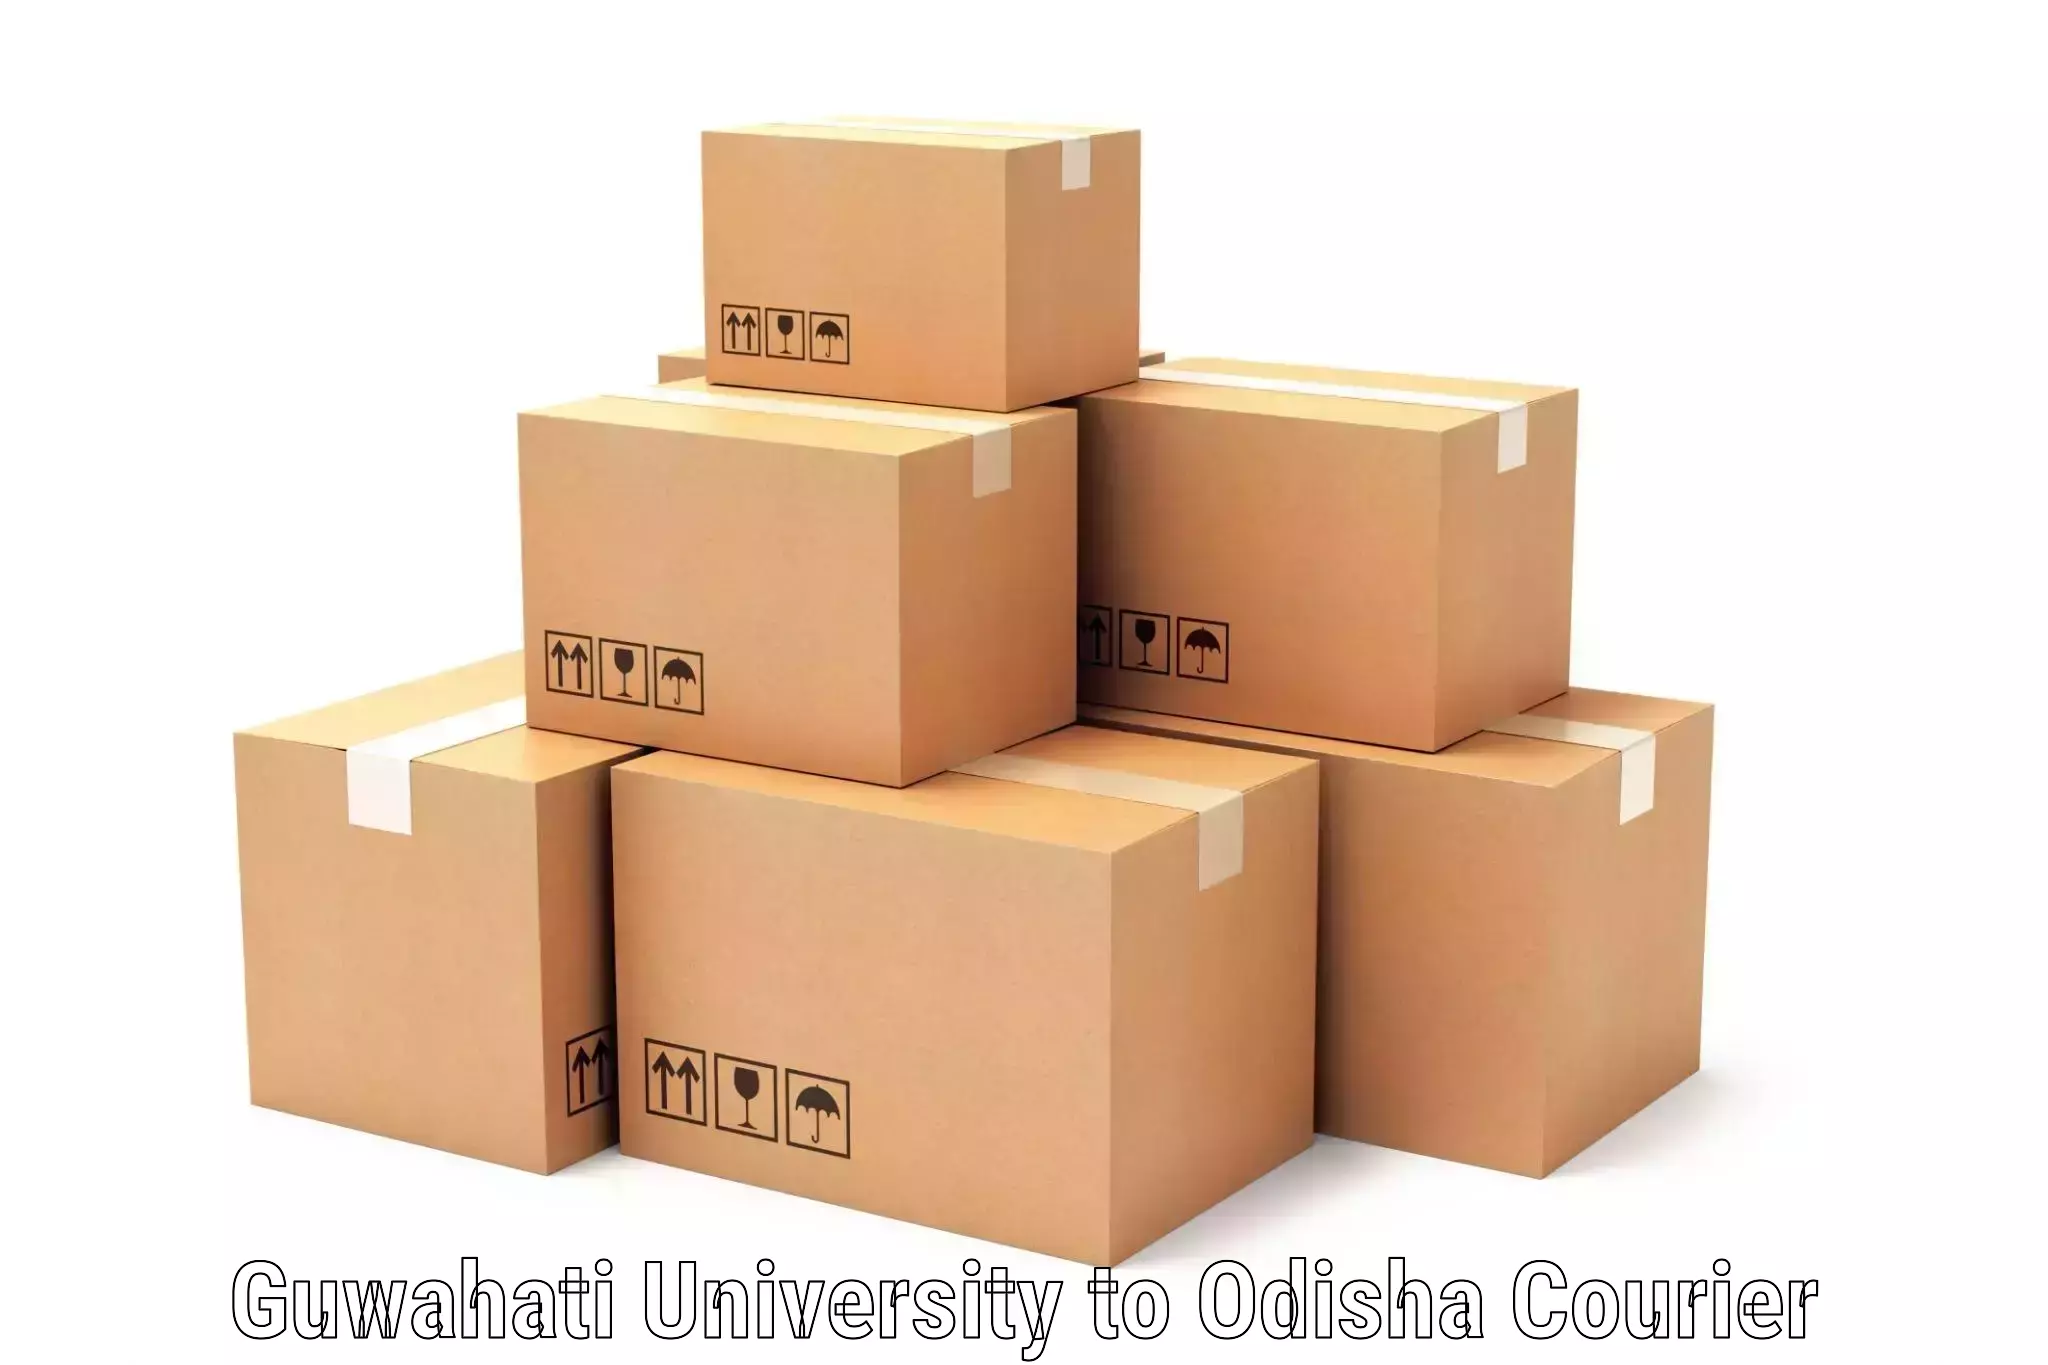 Large-scale shipping solutions Guwahati University to Ghuntagadia